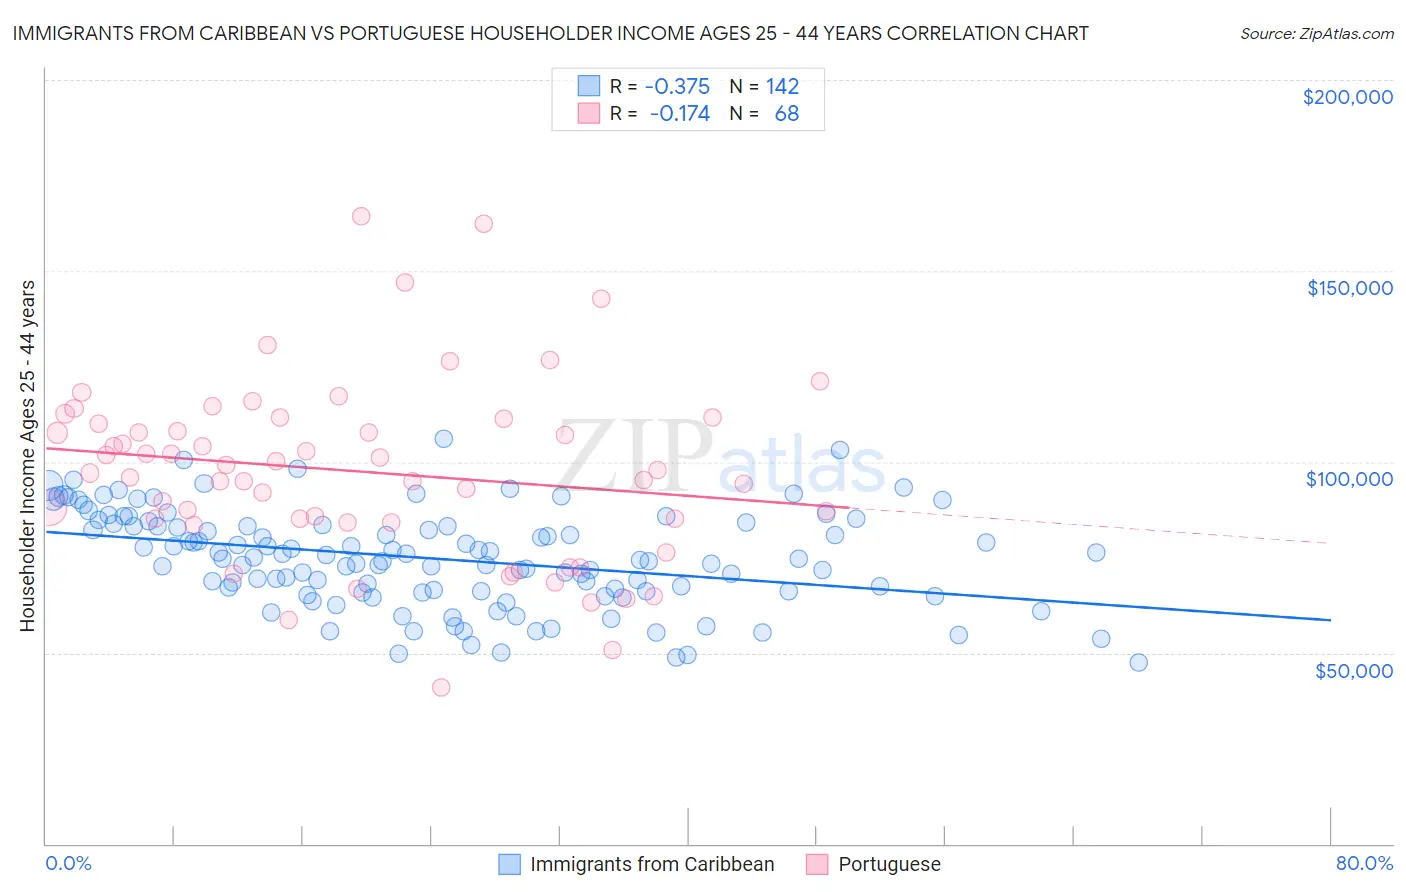 Immigrants from Caribbean vs Portuguese Householder Income Ages 25 - 44 years